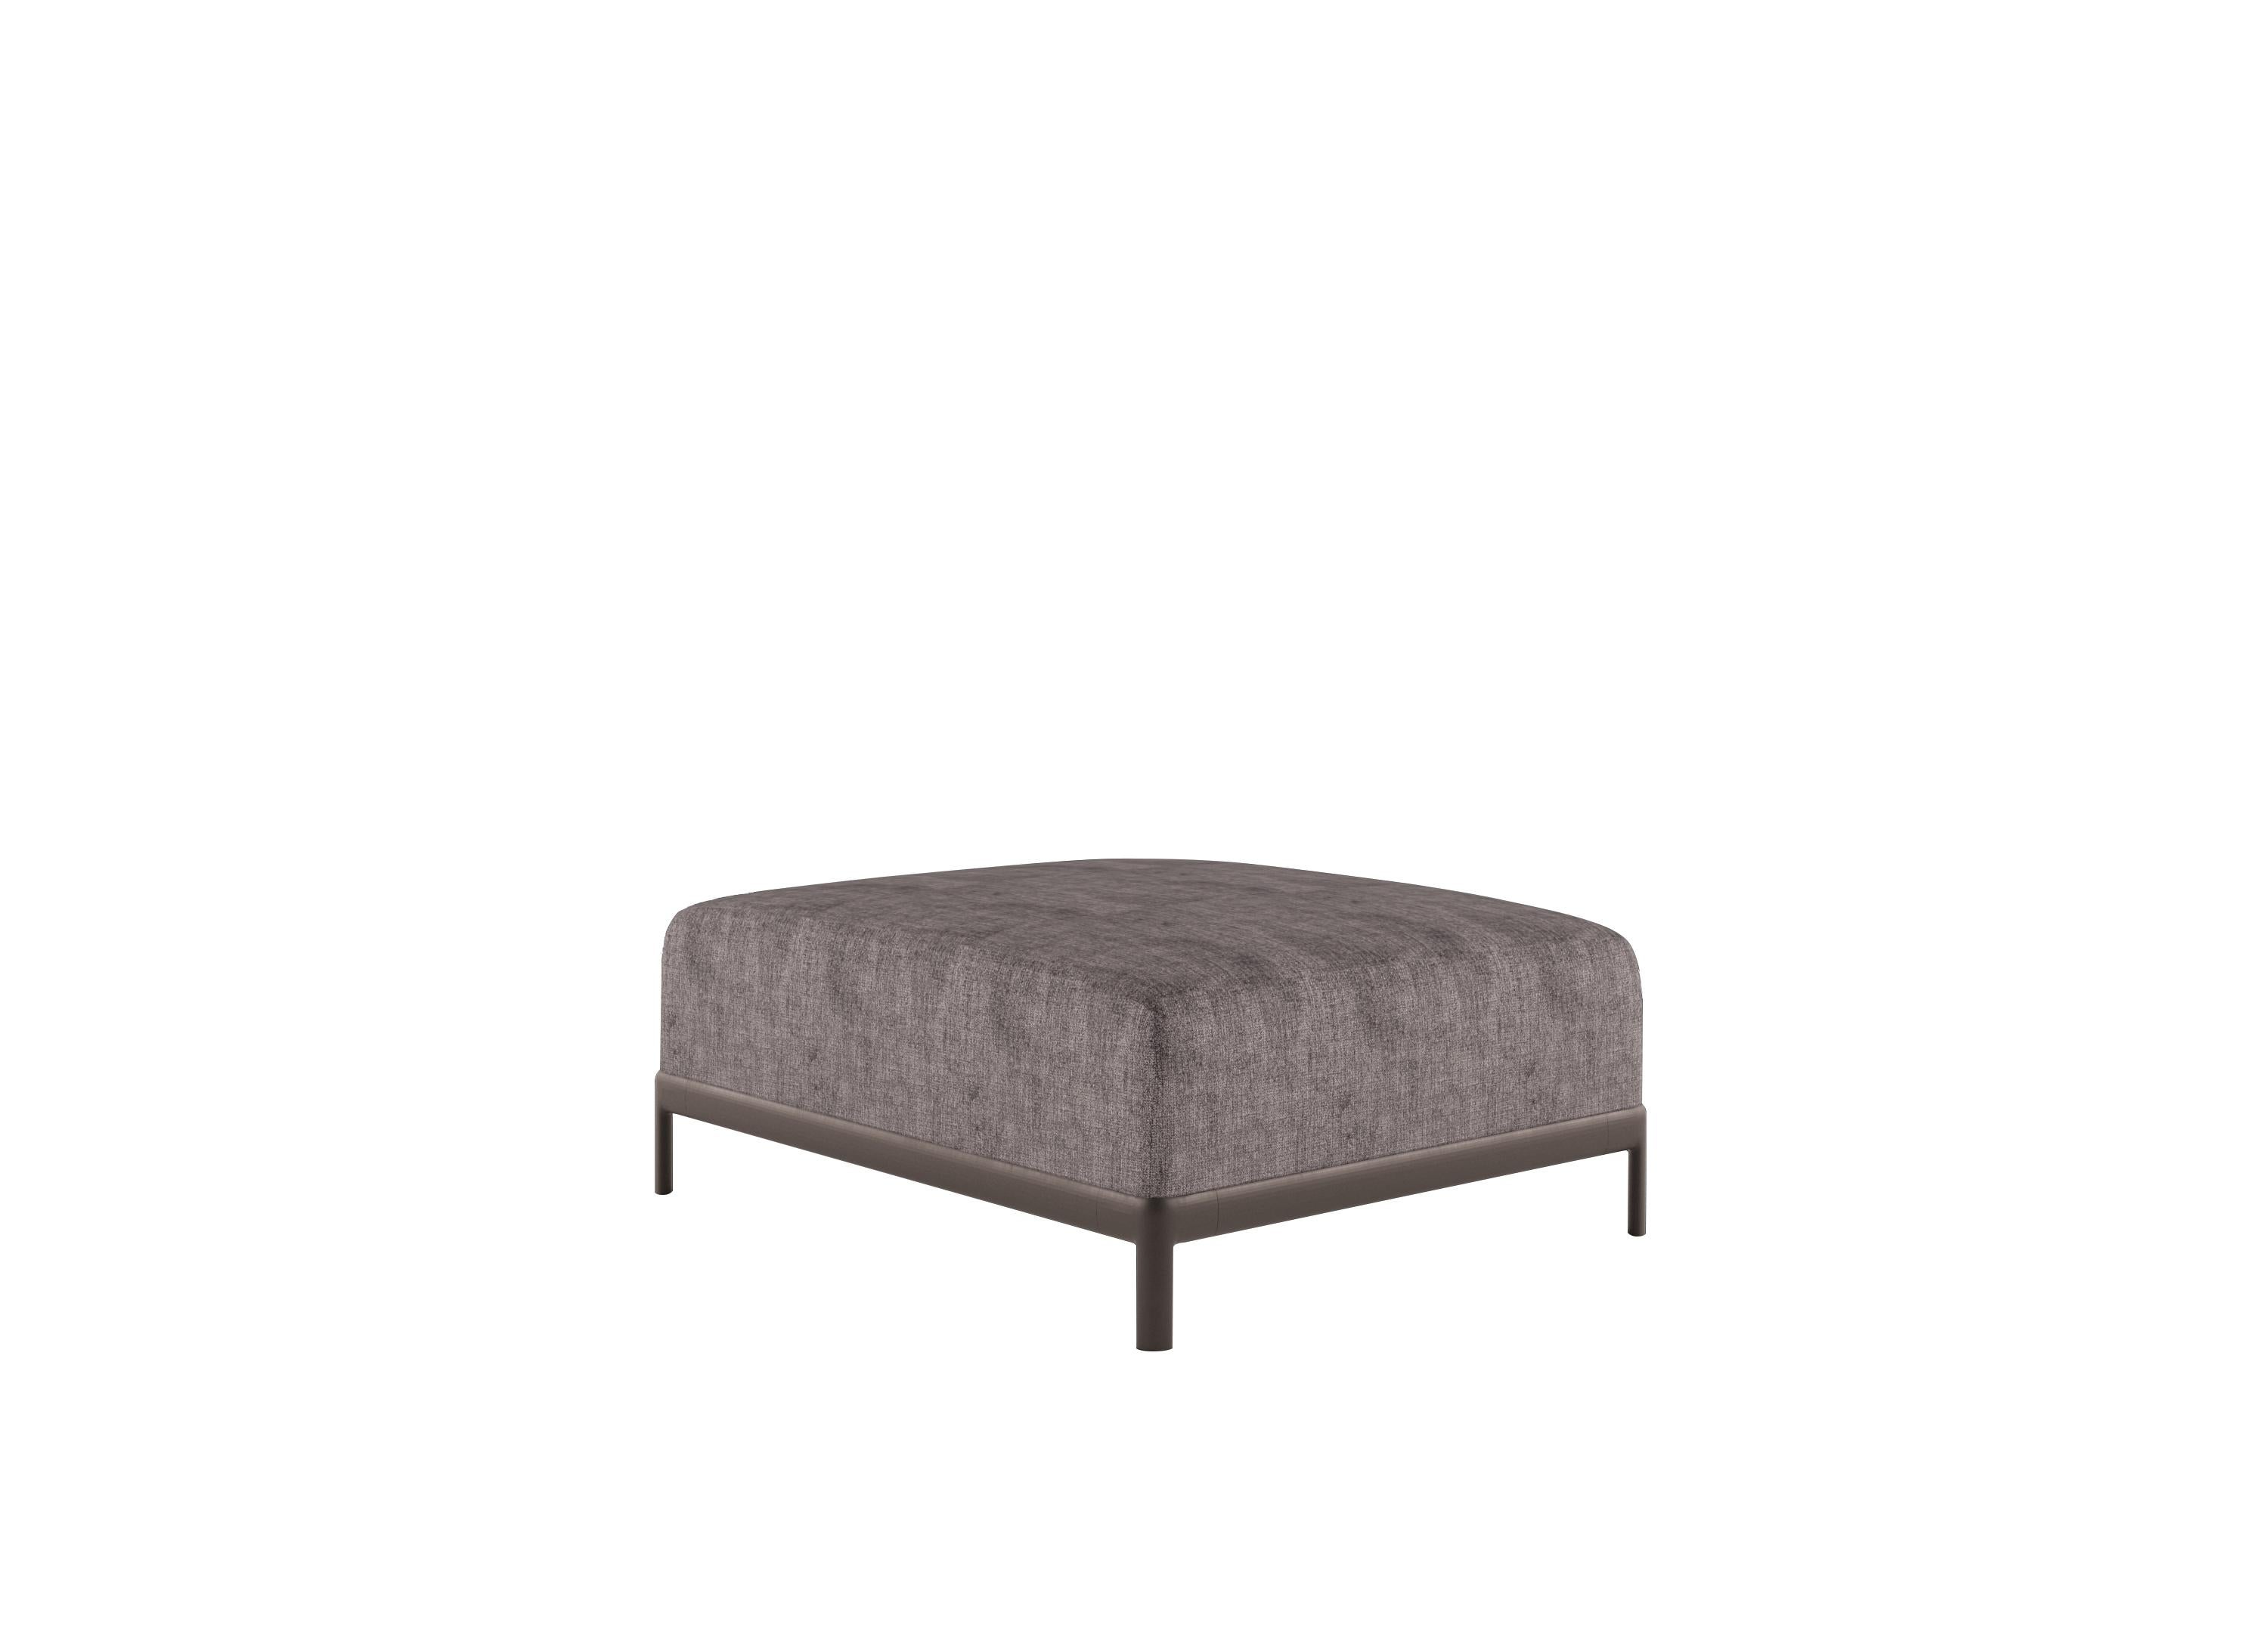 Alias P51 AluZen Soft Pouf with Upholstery and Lacquered Aluminum Frame by Ludovica+Roberto Palomba

Ottoman with structure in lacquered or polished aluminium.Seat with removable cover in fabric or leather.

Ludovica + Roberto Palomba, the